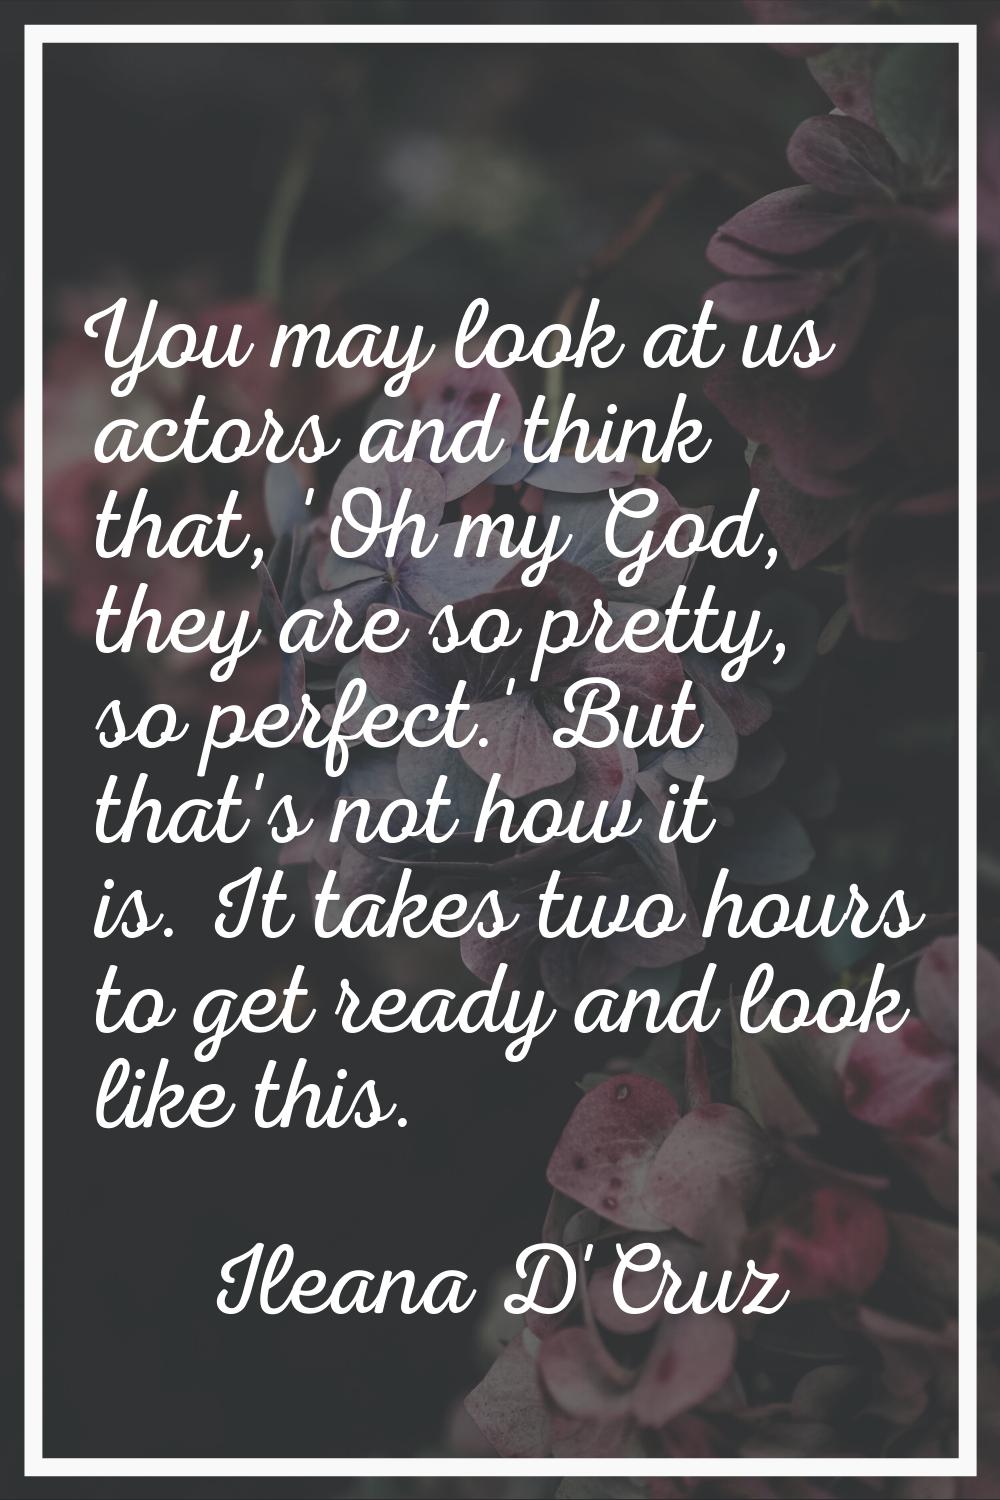 You may look at us actors and think that, 'Oh my God, they are so pretty, so perfect.' But that's n